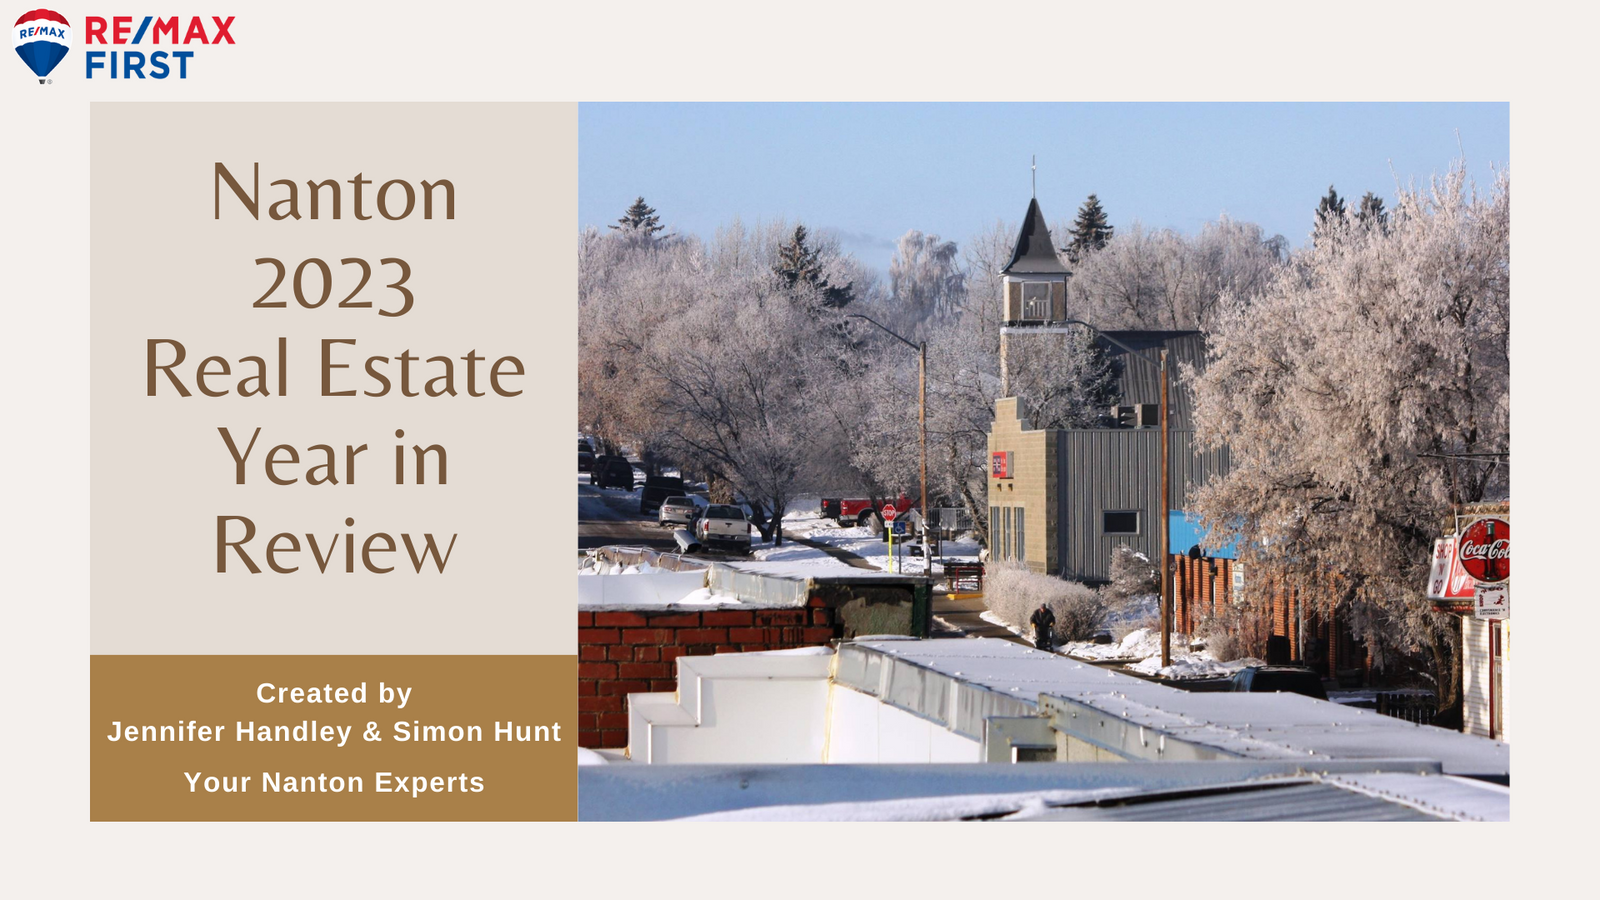  2023 Nanton Real Estate Year in Review: A Market of low inventory and high demand